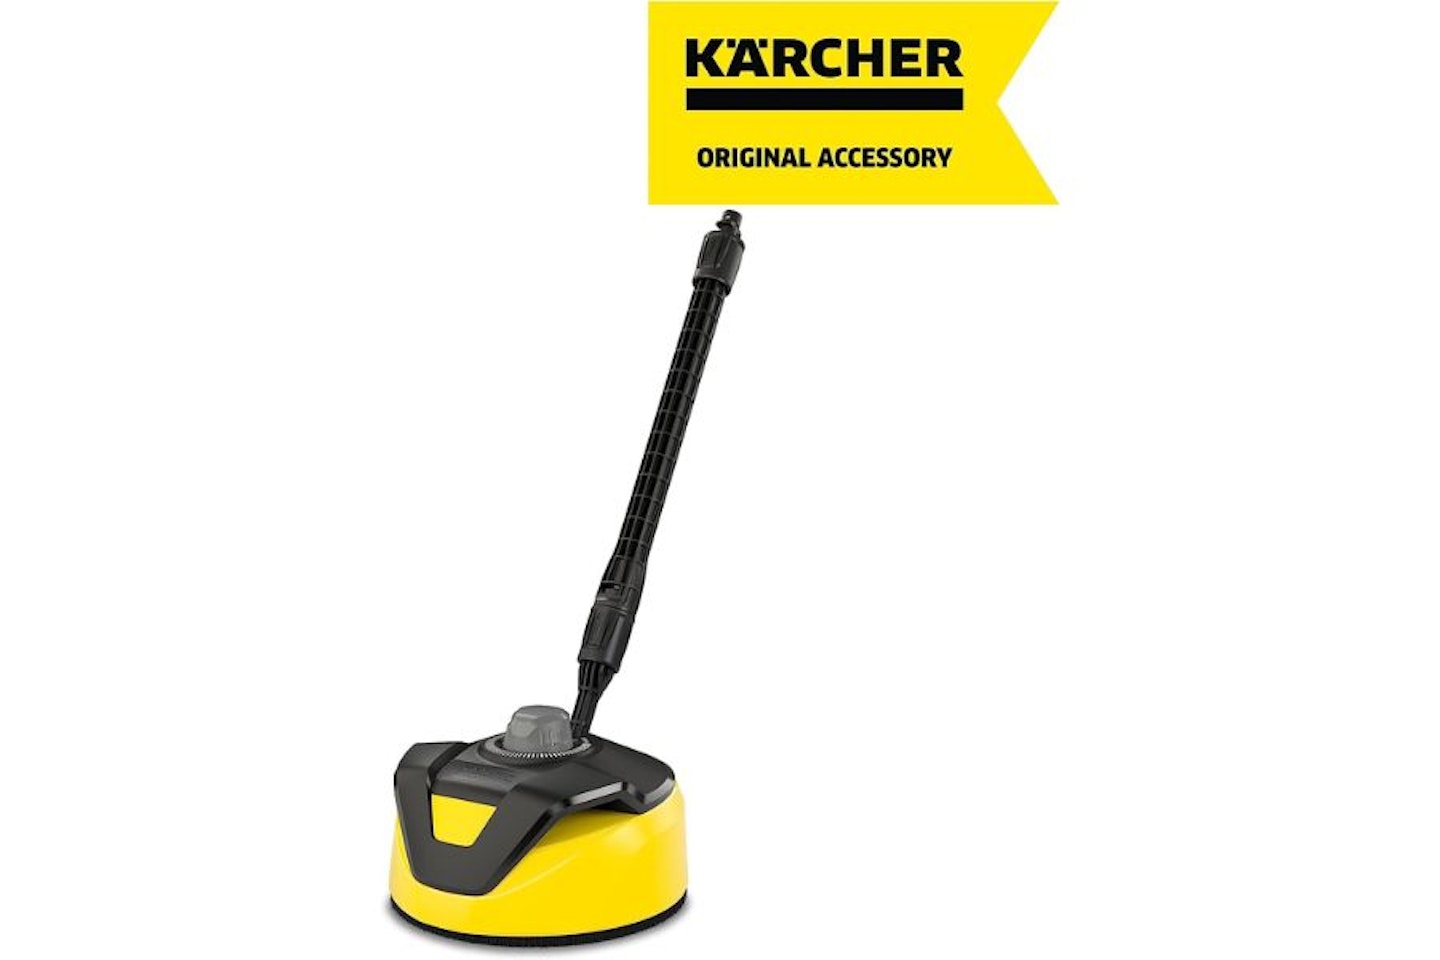 Karcher T5 Patio Cleaner